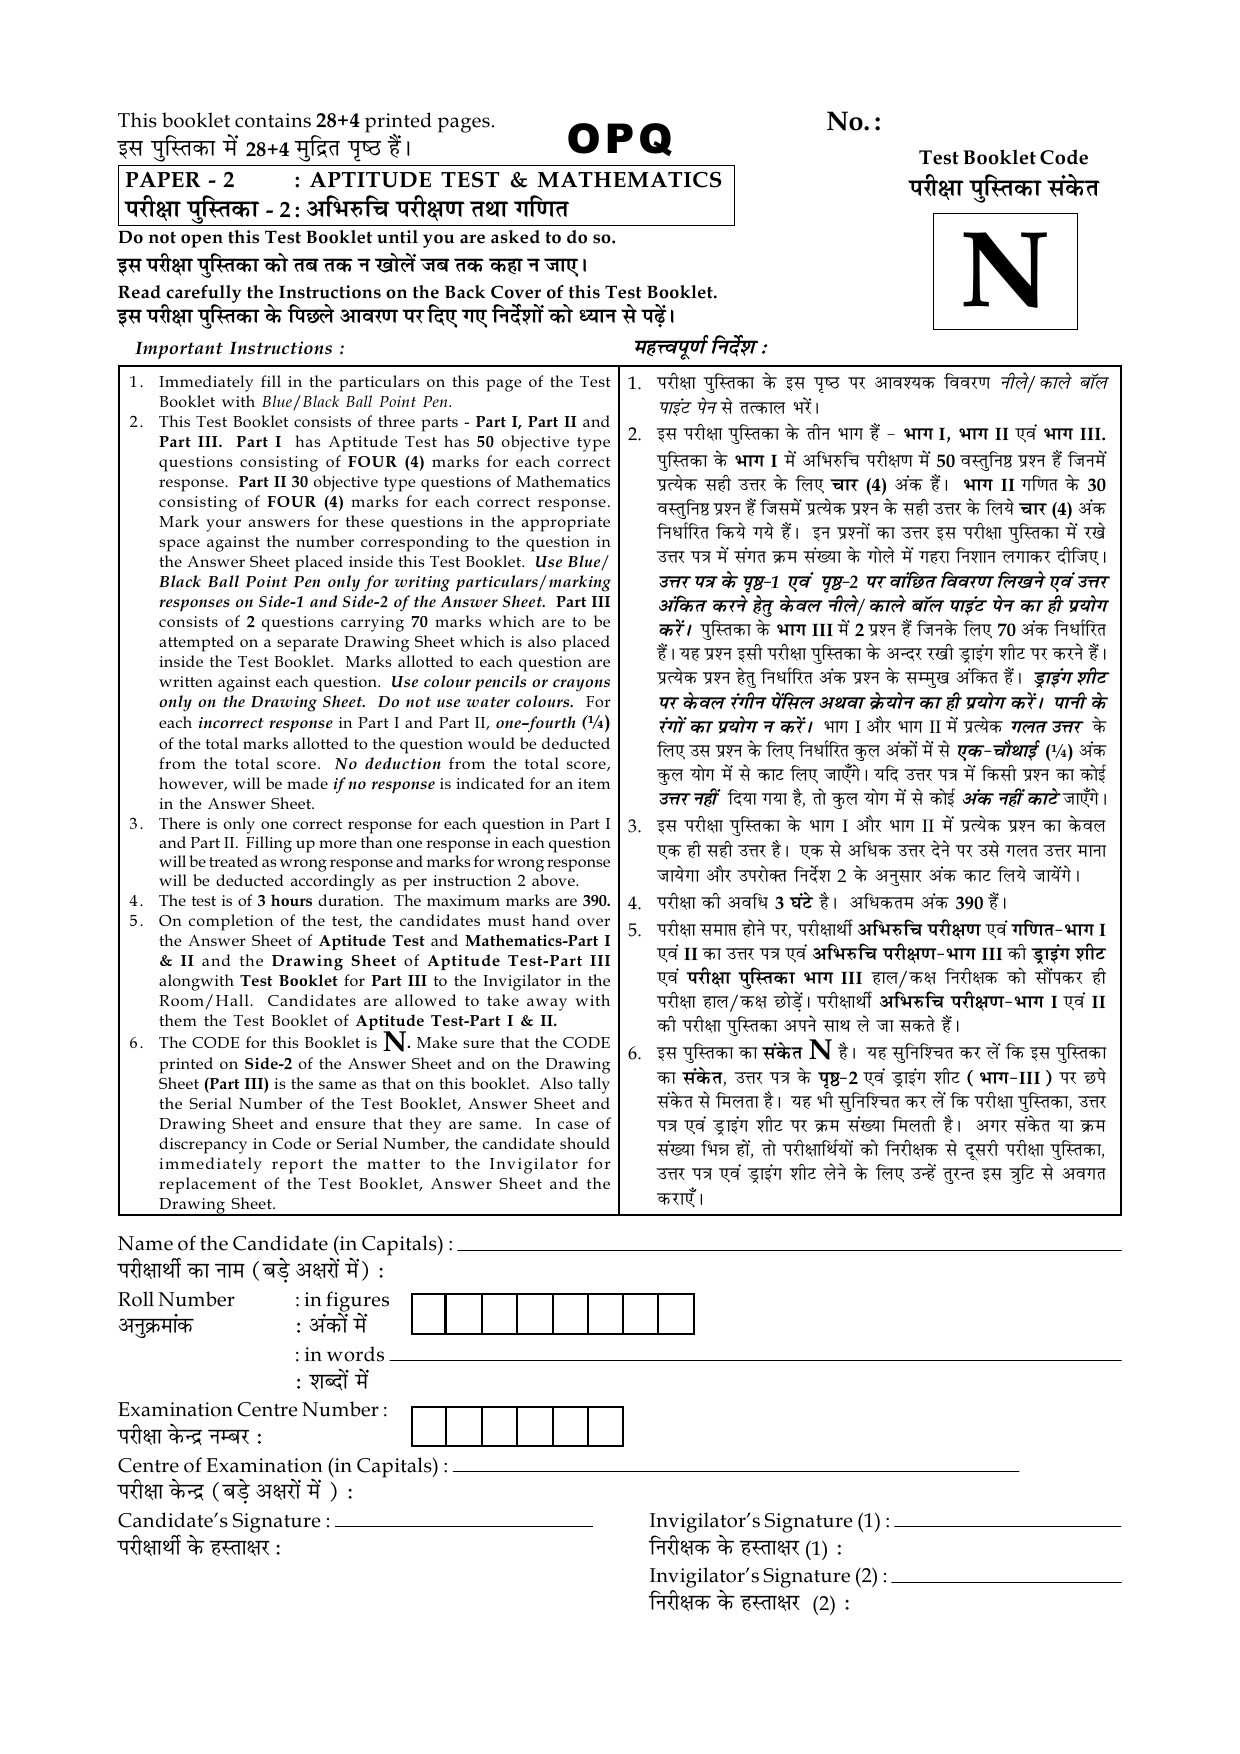 JEE Main Exam Question Paper 2015 Booklet N 1